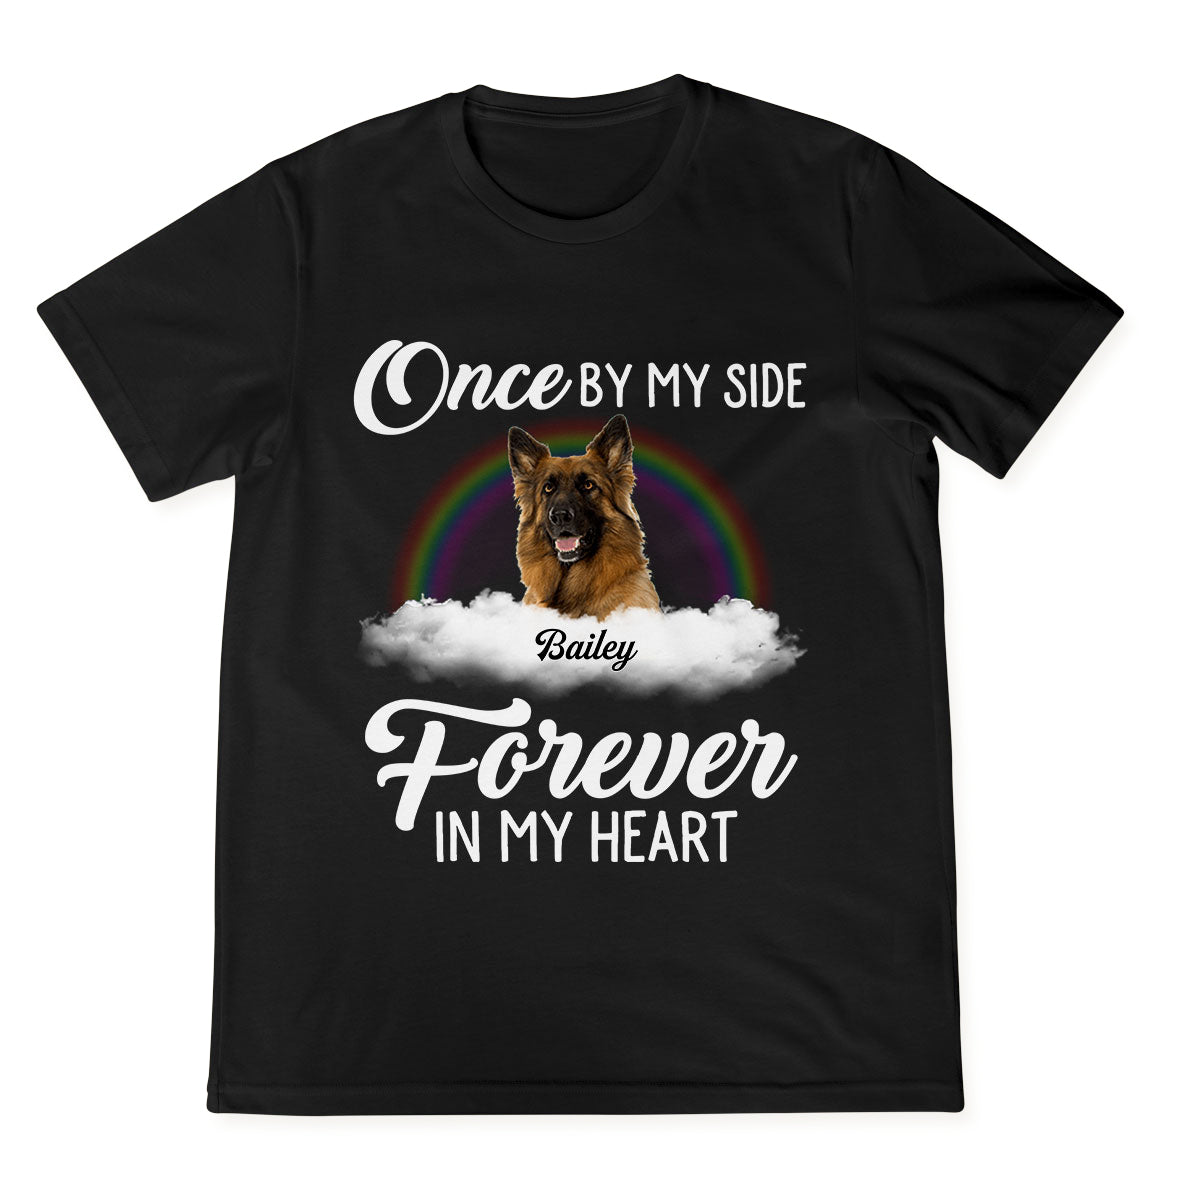 Once By My Side - Personalized Custom Shirt